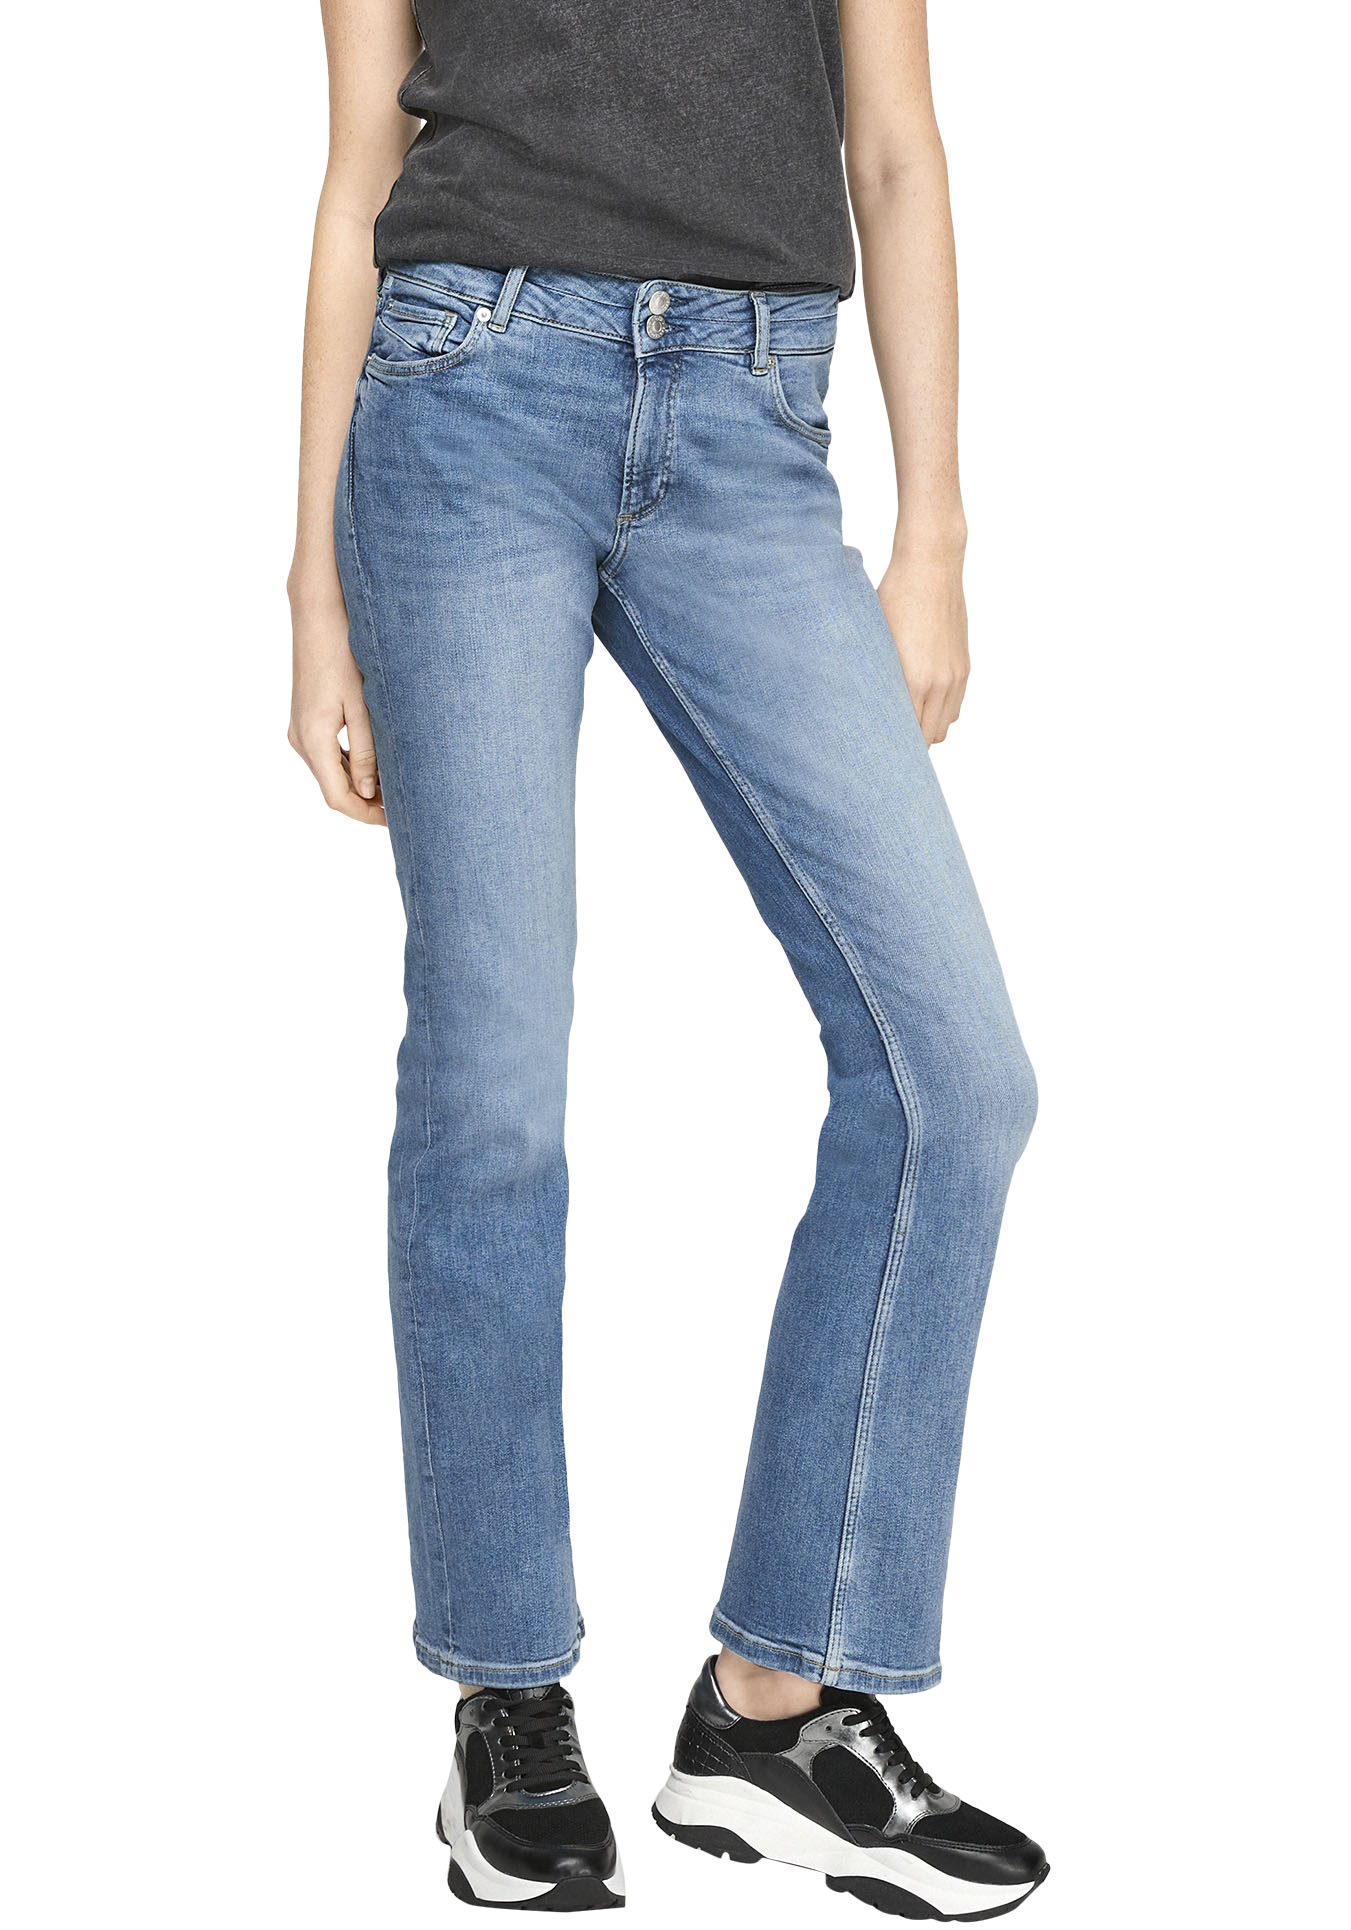 Q/S by s.Oliver Bootcut-Jeans, im 5-Pocket-Style von Q/S by s.Oliver